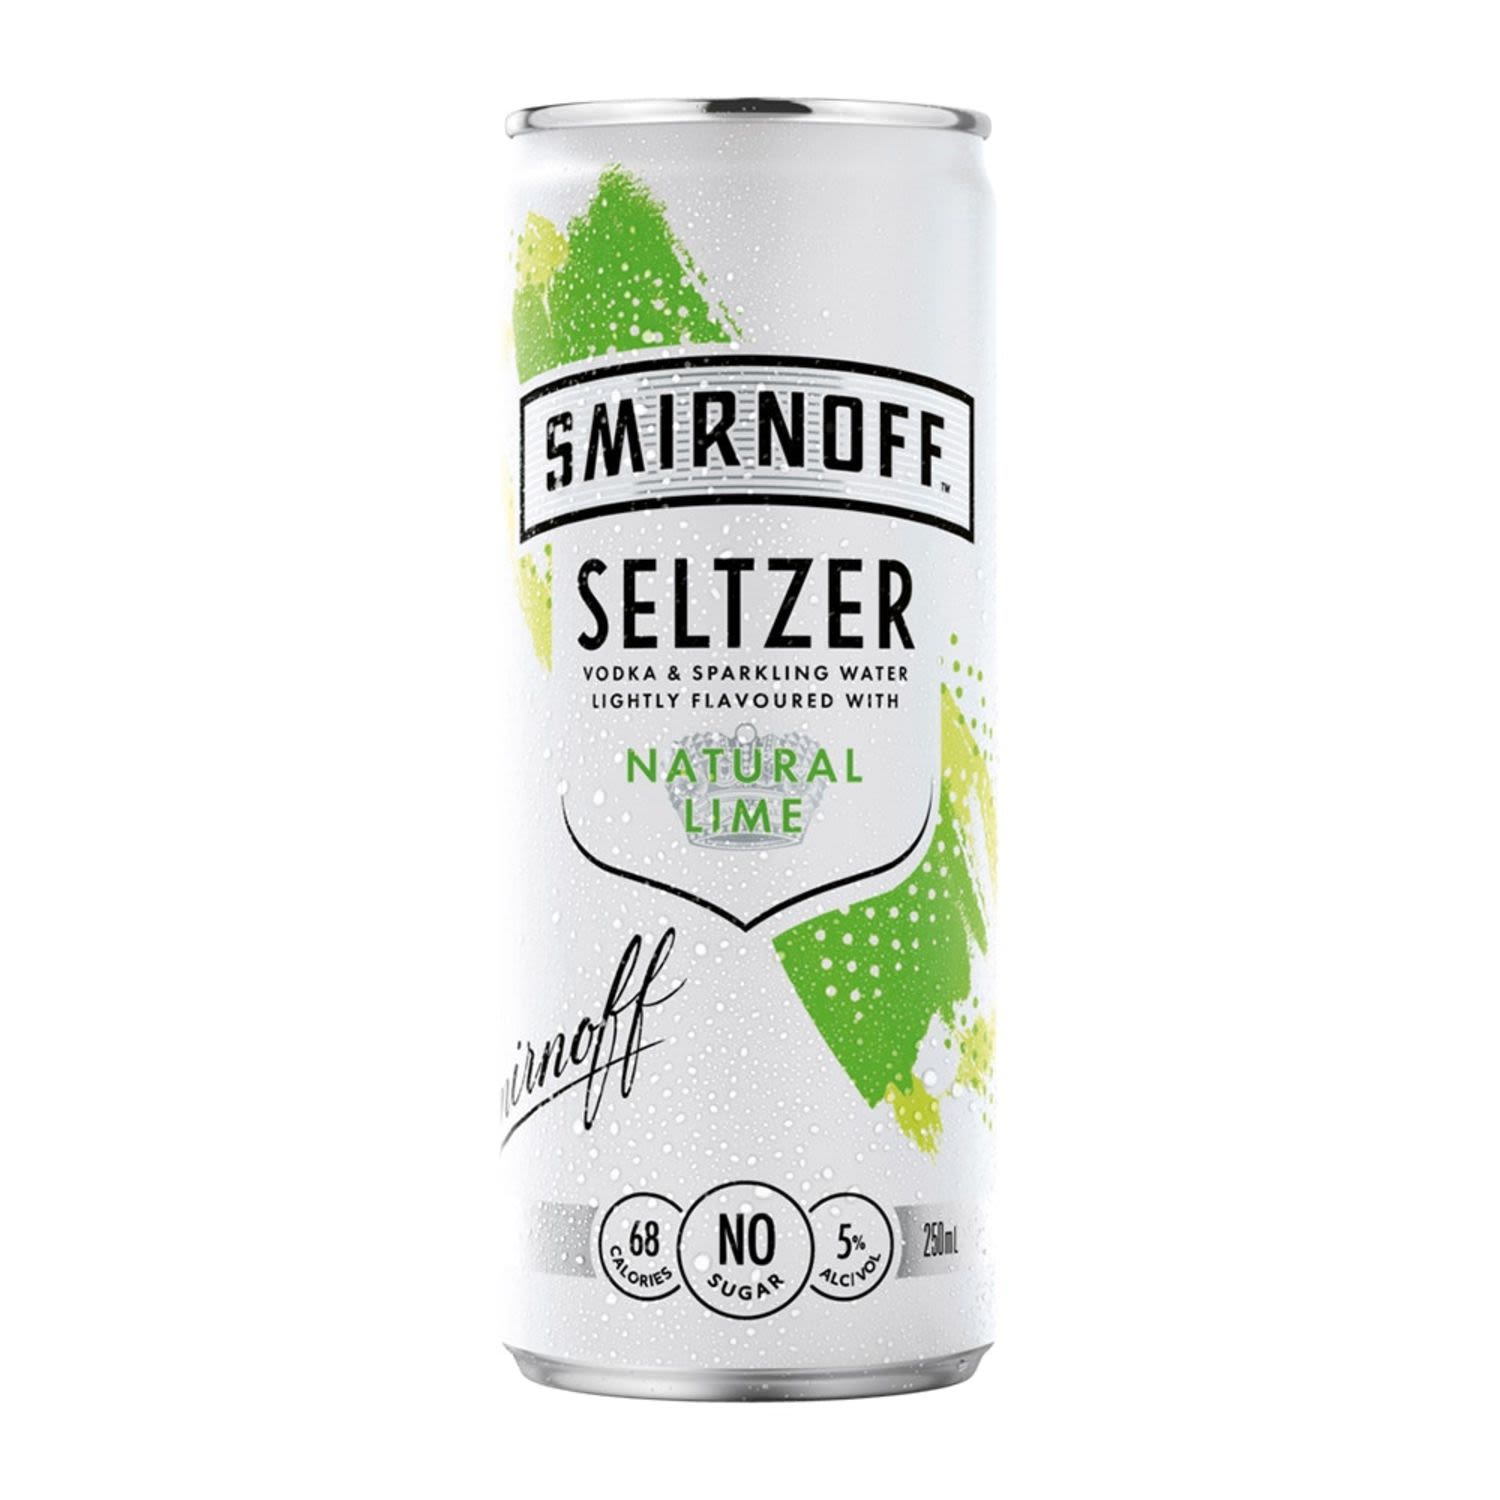 The perfect blend of Smirnoff vodka and lightly flavoured sparkling water. A light and zesty lime aroma, fresh and clean taste of lime on the palate with a fresh after taste.<br /> <br />Alcohol Volume: 5.00%<br /><br />Pack Format: Can<br /><br />Standard Drinks: 1</br /><br />Pack Type: Can<br />